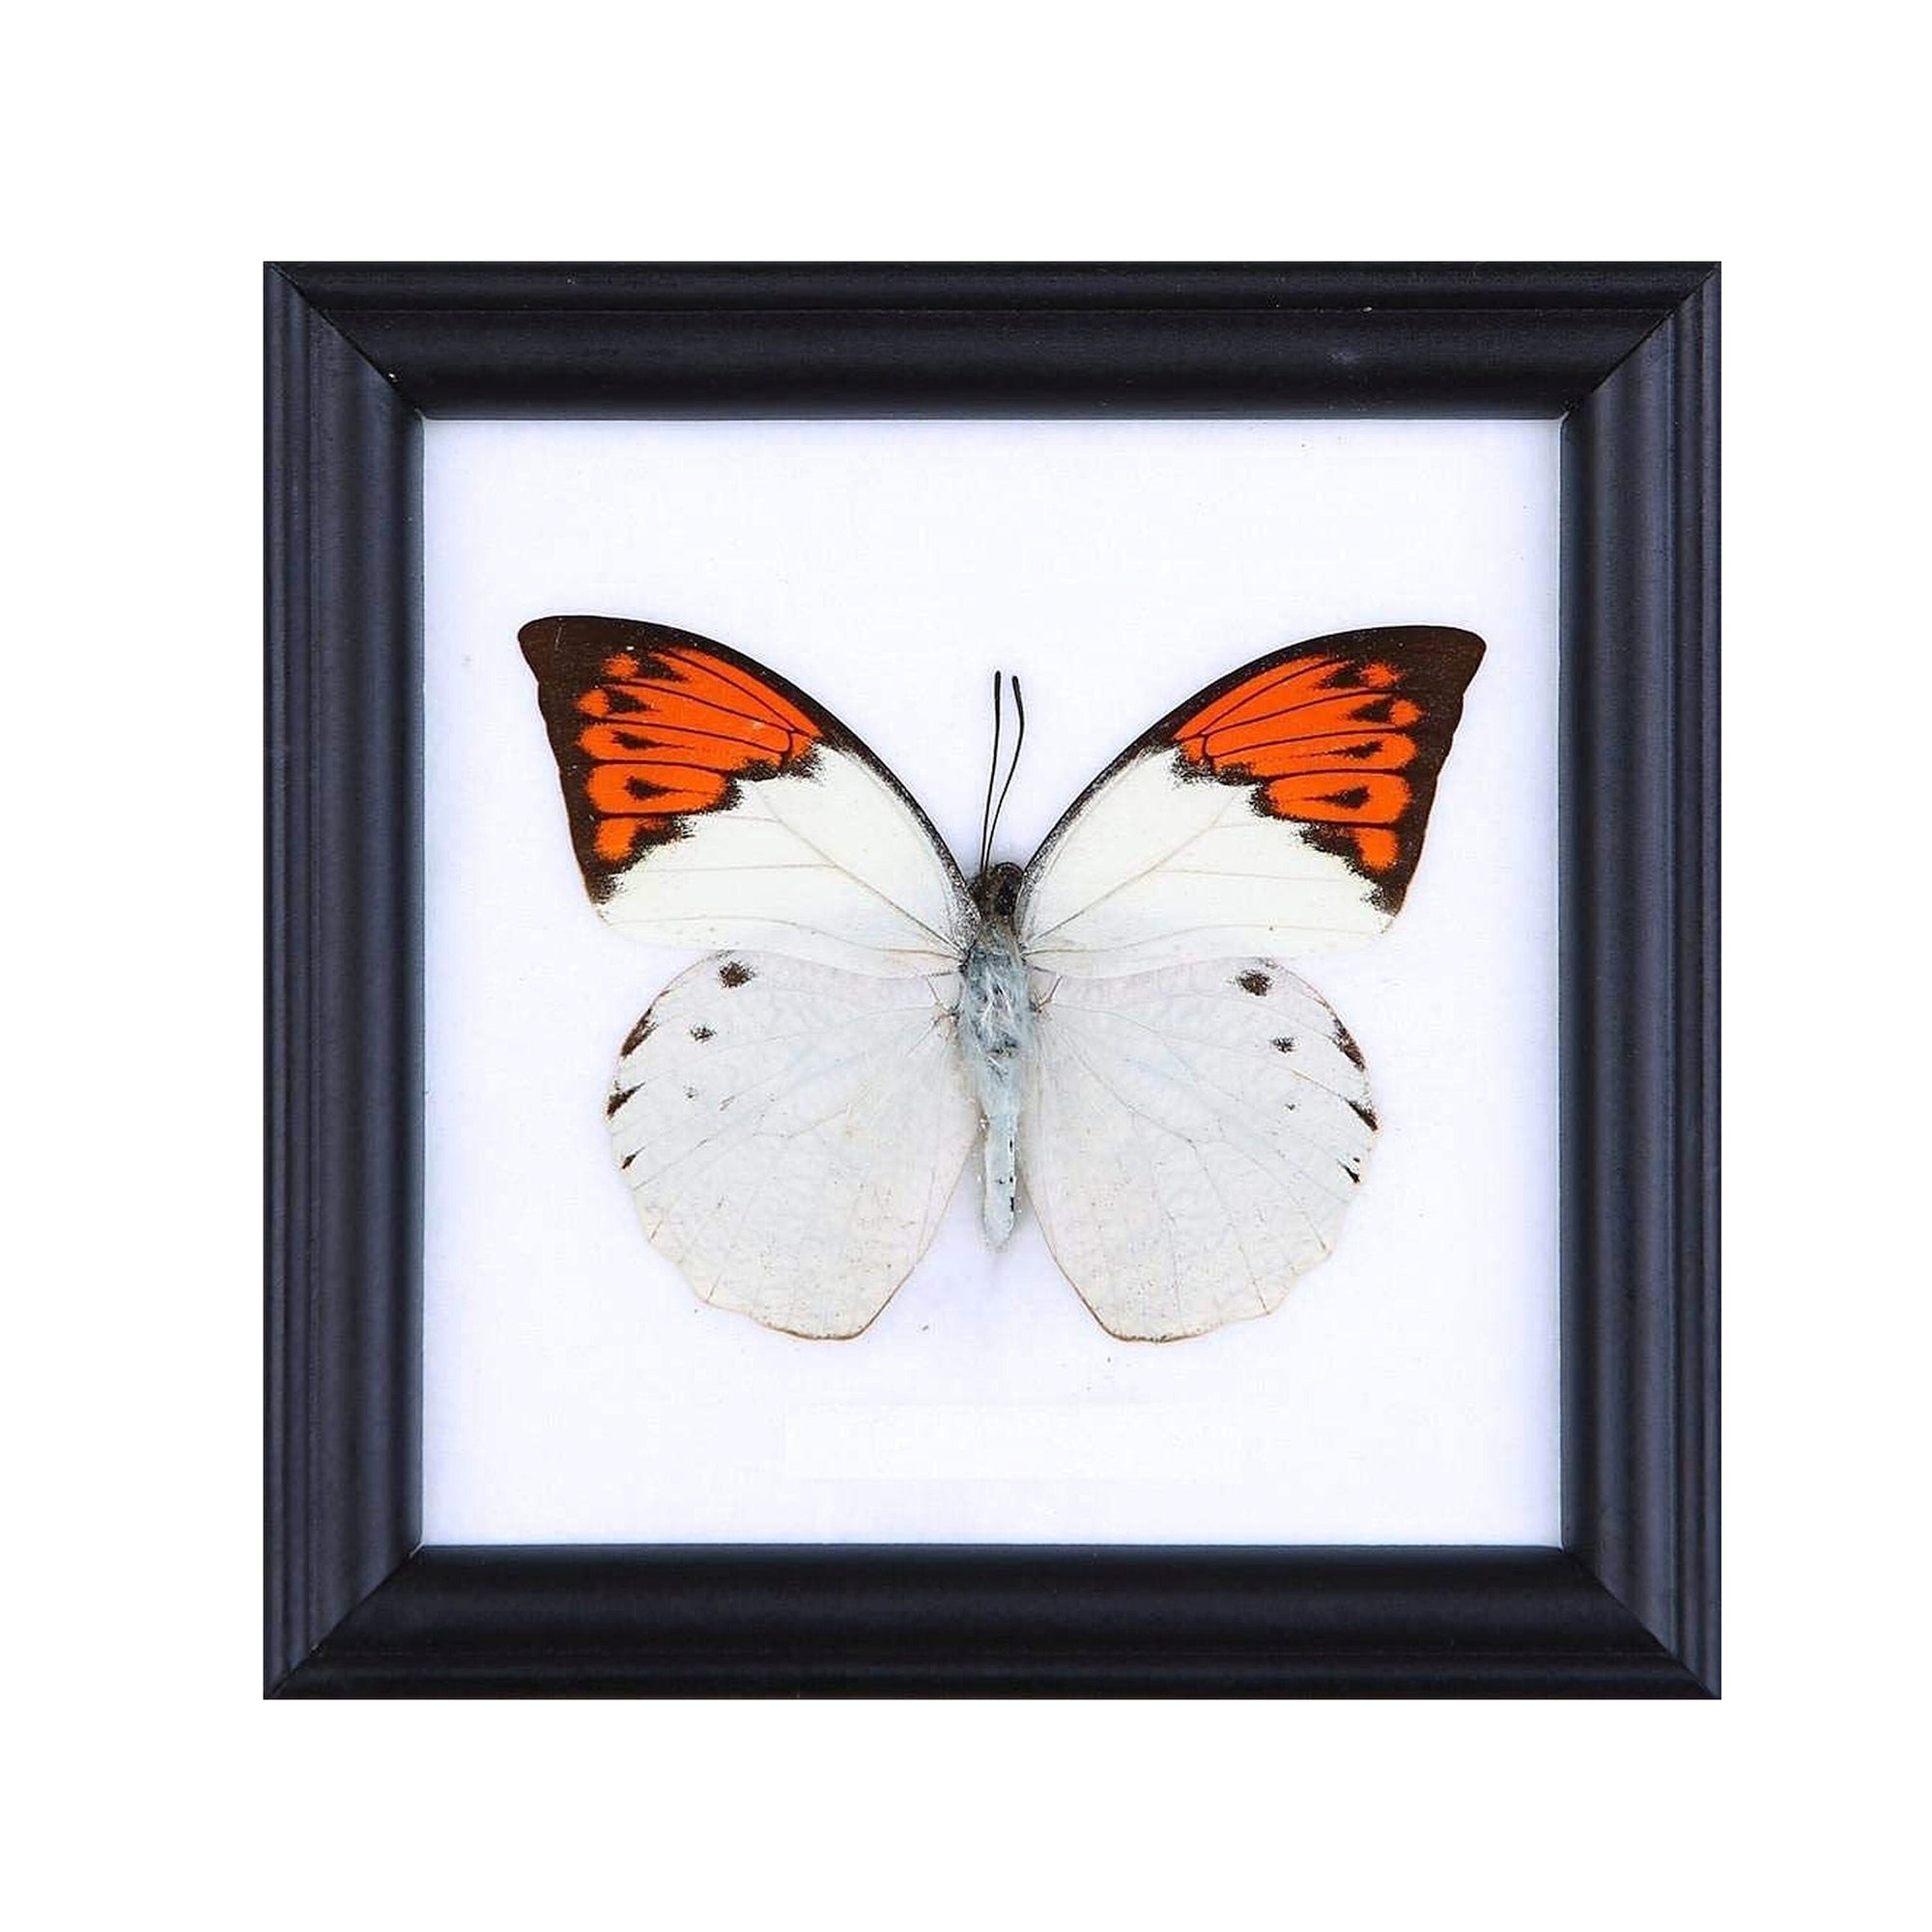 12 FRAMES (FOR RESELLERS) The Great Orange Tip | Real Butterfly Mounted Under Glass, Wall Hanging Home Décor Framed 5 x 5 In. Gift Boxed